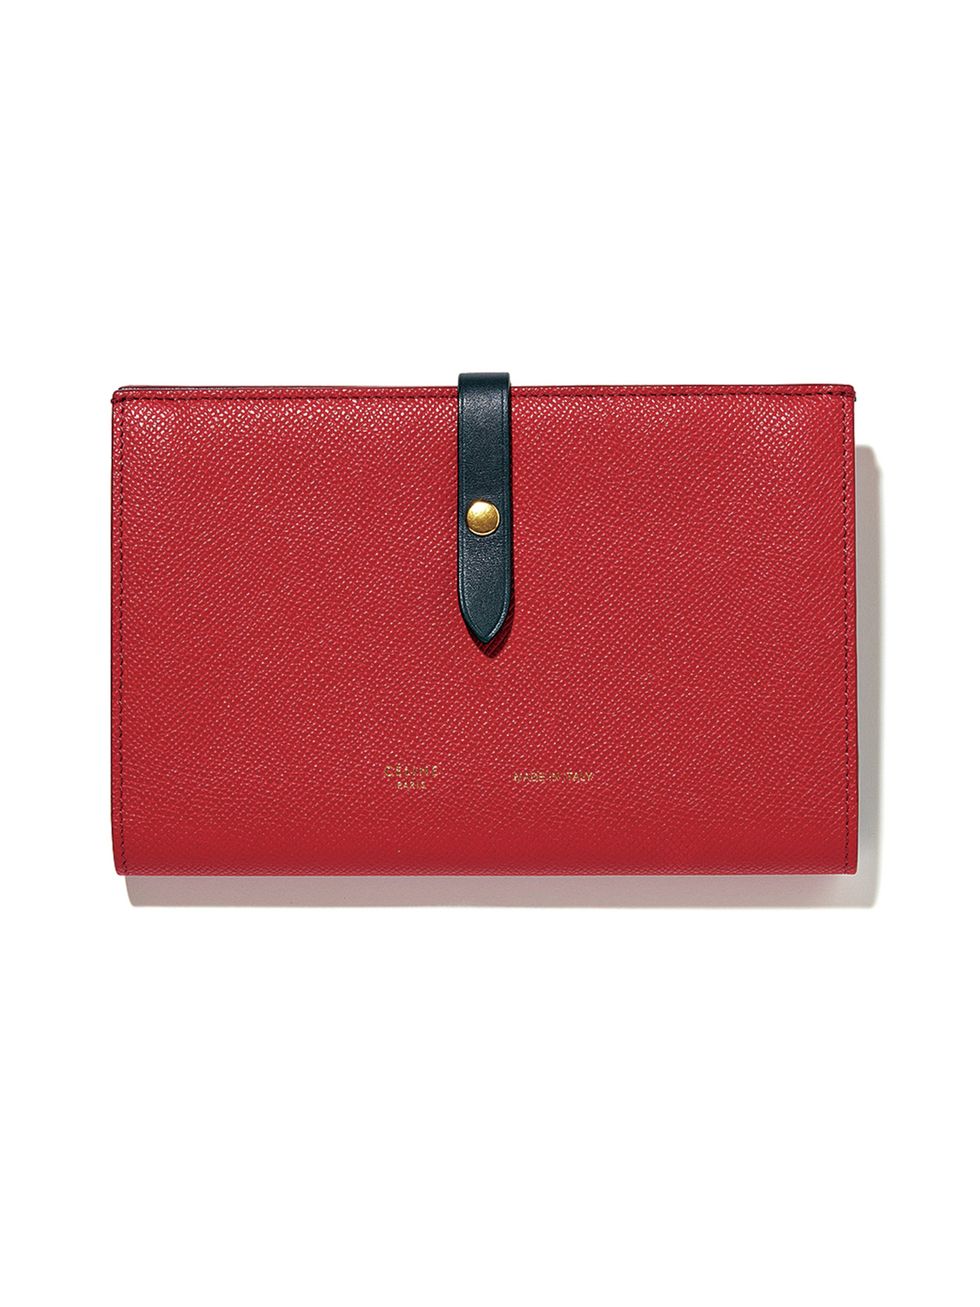 Red, Carmine, Maroon, Rectangle, Tan, Wallet, Coquelicot, Leather, Everyday carry, 